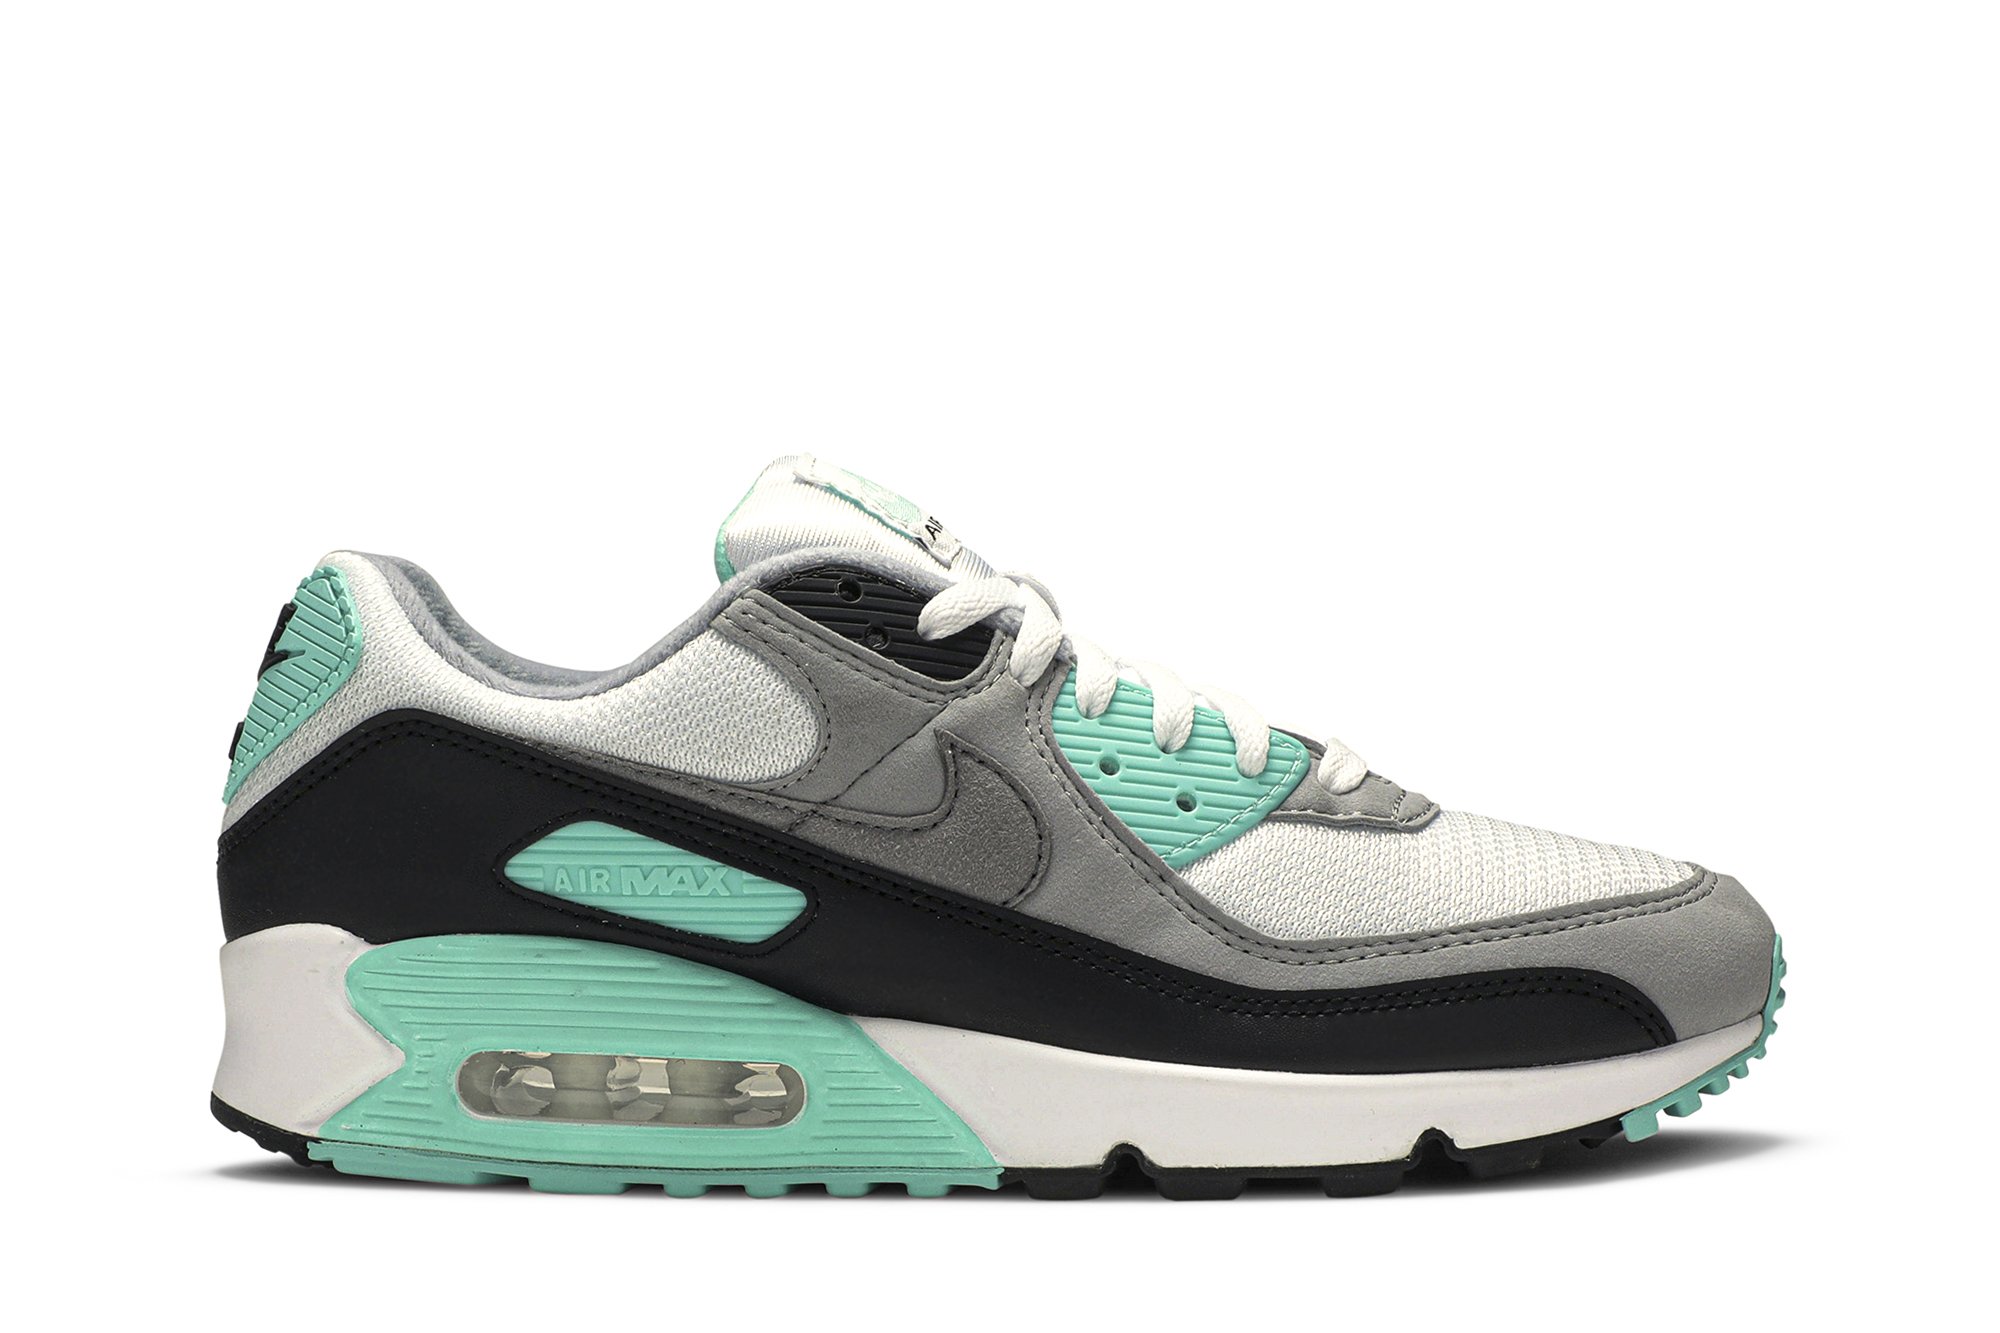 Buy Air Max 90 'Hyper Turquoise' - CD0881 100 | GOAT